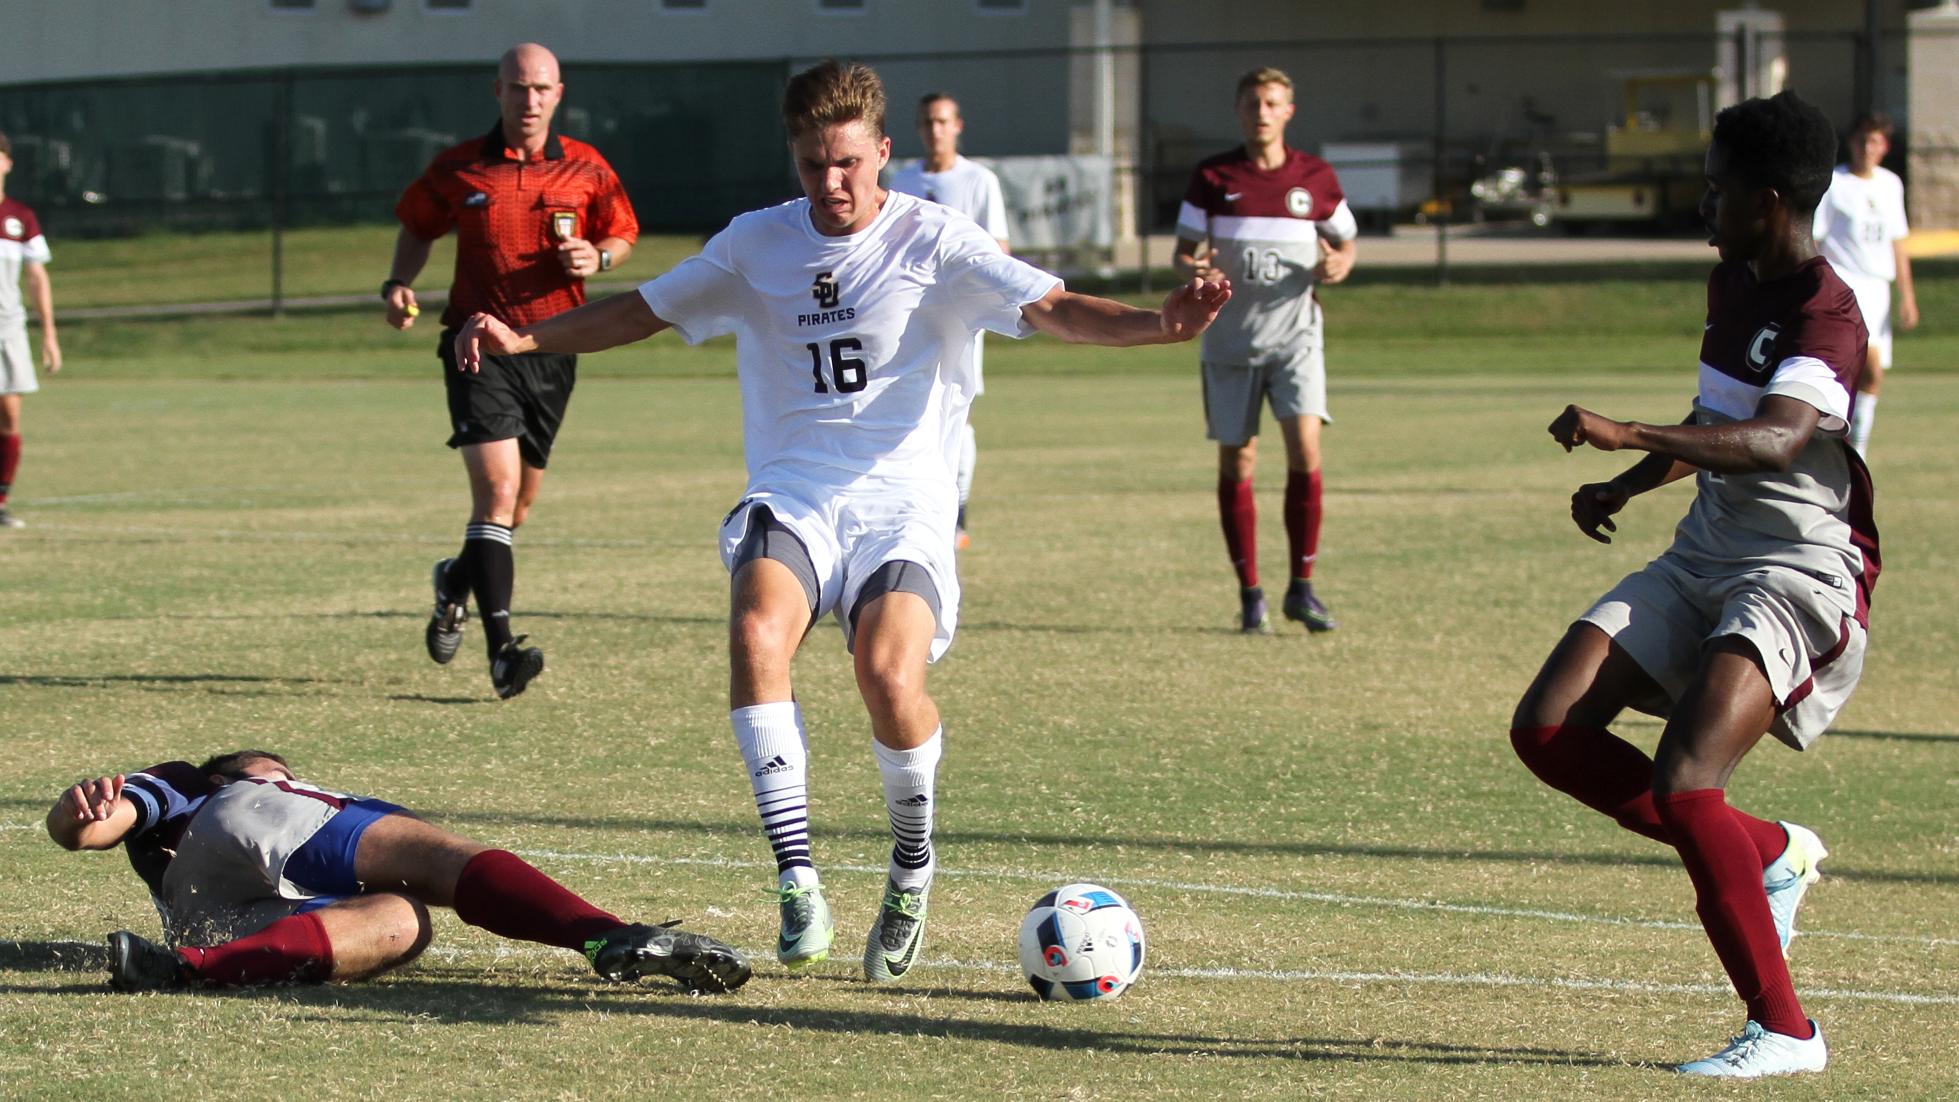 Pirates score four straight to defeat Schreiner 4-3 in double overtime